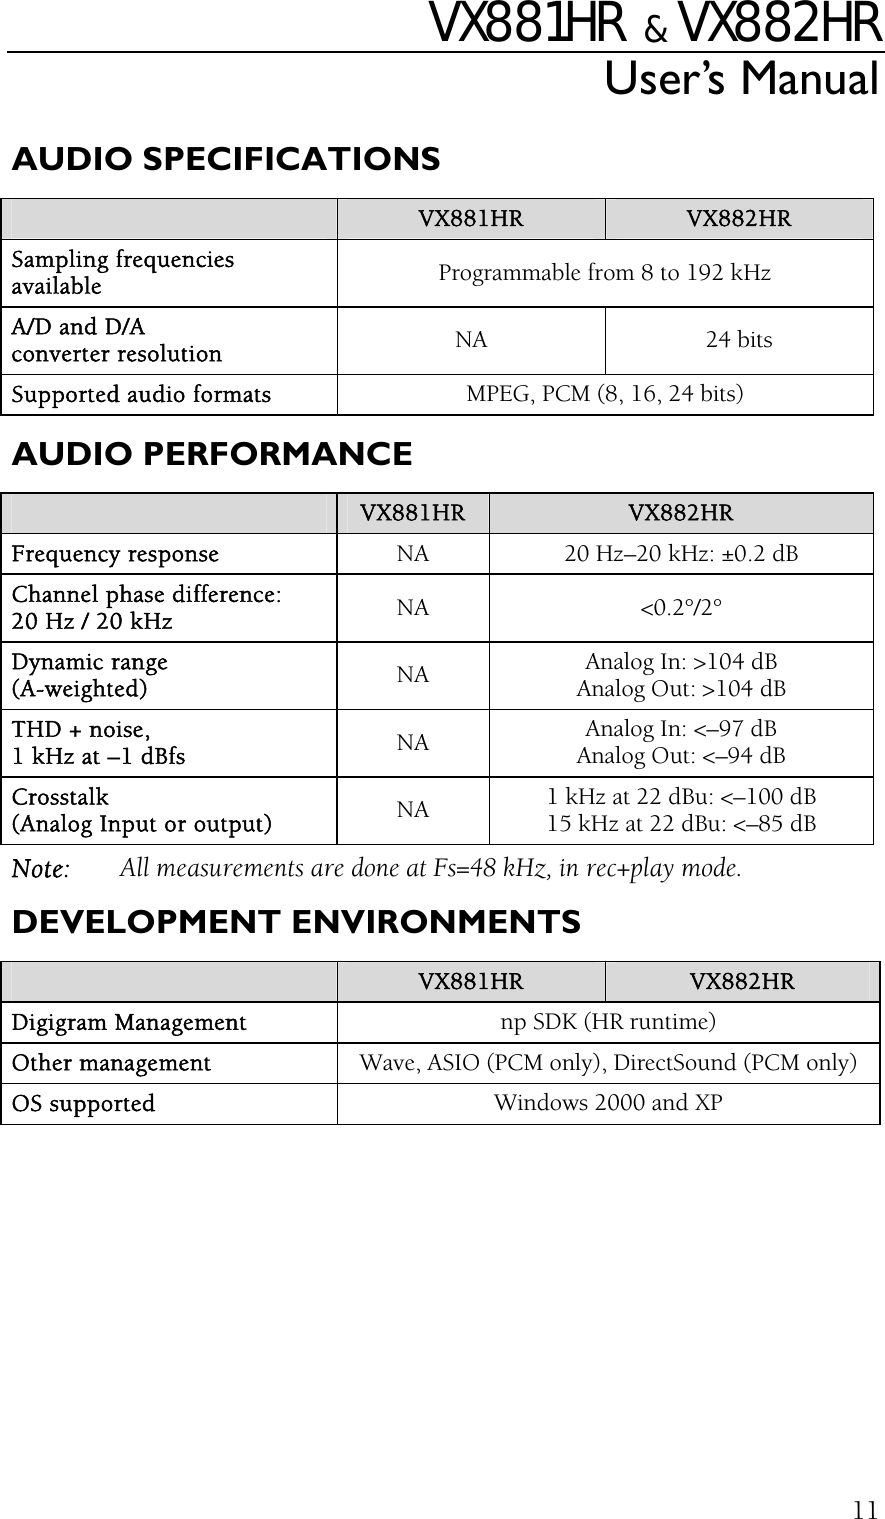 VX881HR   &amp;  VX882HR User’s Manual  11AUDIO SPECIFICATIONS  VX881HR  VX882HR Sampling frequencies available  Programmable from 8 to 192 kHz A/D and D/A converter resolution  NA 24 bits Supported audio formats  MPEG, PCM (8, 16, 24 bits) AUDIO PERFORMANCE  VX881HR  VX882HR Frequency response  NA  20 Hz–20 kHz: ±0.2 dB Channel phase difference: 20 Hz / 20 kHz  NA &lt;0.2°/2° Dynamic range (A-weighted)  NA  Analog In: &gt;104 dB Analog Out: &gt;104 dB THD + noise, 1 kHz at –1 dBfs  NA  Analog In: &lt;–97 dB Analog Out: &lt;–94 dB Crosstalk (Analog Input or output)  NA  1 kHz at 22 dBu: &lt;–100 dB 15 kHz at 22 dBu: &lt;–85 dB Note:  All measurements are done at Fs=48 kHz, in rec+play mode.  DEVELOPMENT ENVIRONMENTS  VX881HR  VX882HR Digigram Management  np SDK (HR runtime) Other management  Wave, ASIO (PCM only), DirectSound (PCM only) OS supported  Windows 2000 and XP   